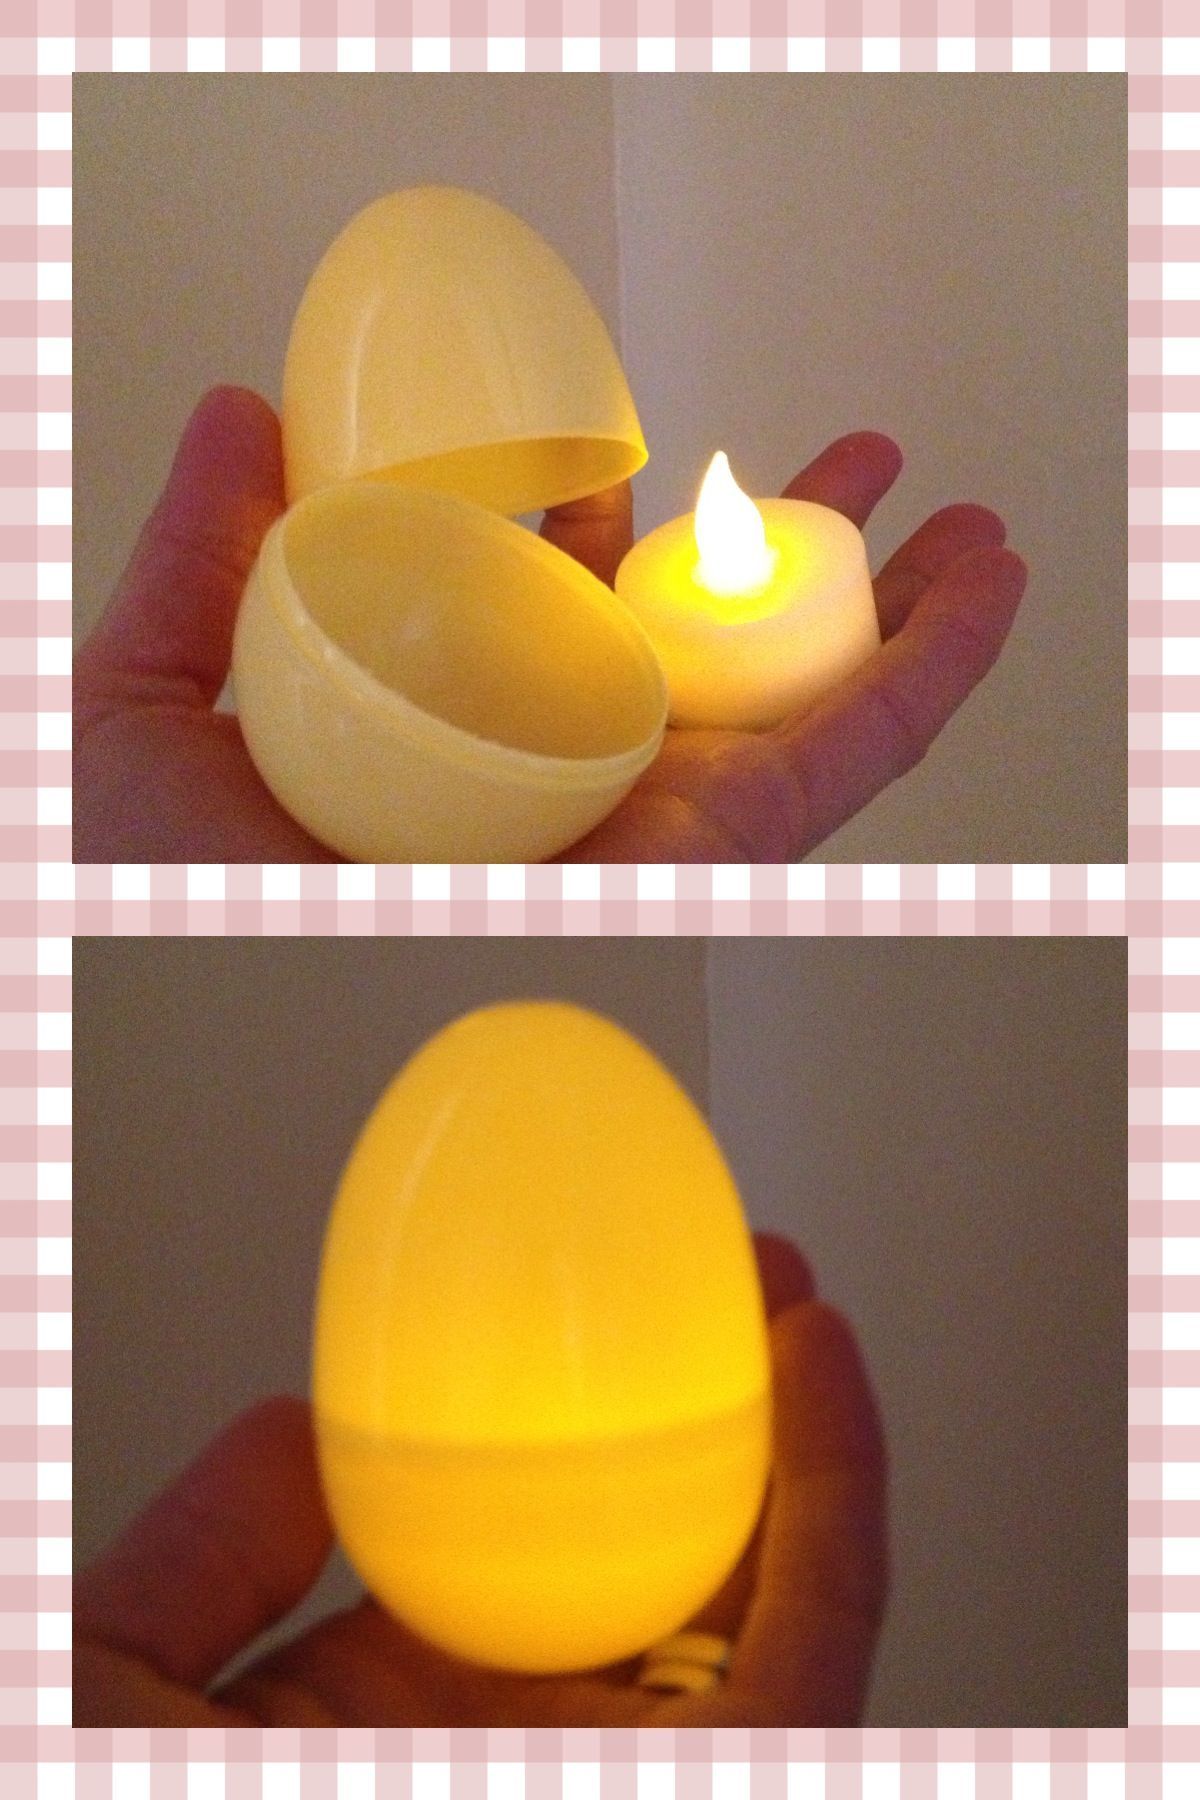 Glow in the dark egg hunt…forget the glow sticks! LEDs fit inside large eggs and can be reused over and over. Happy Easter!